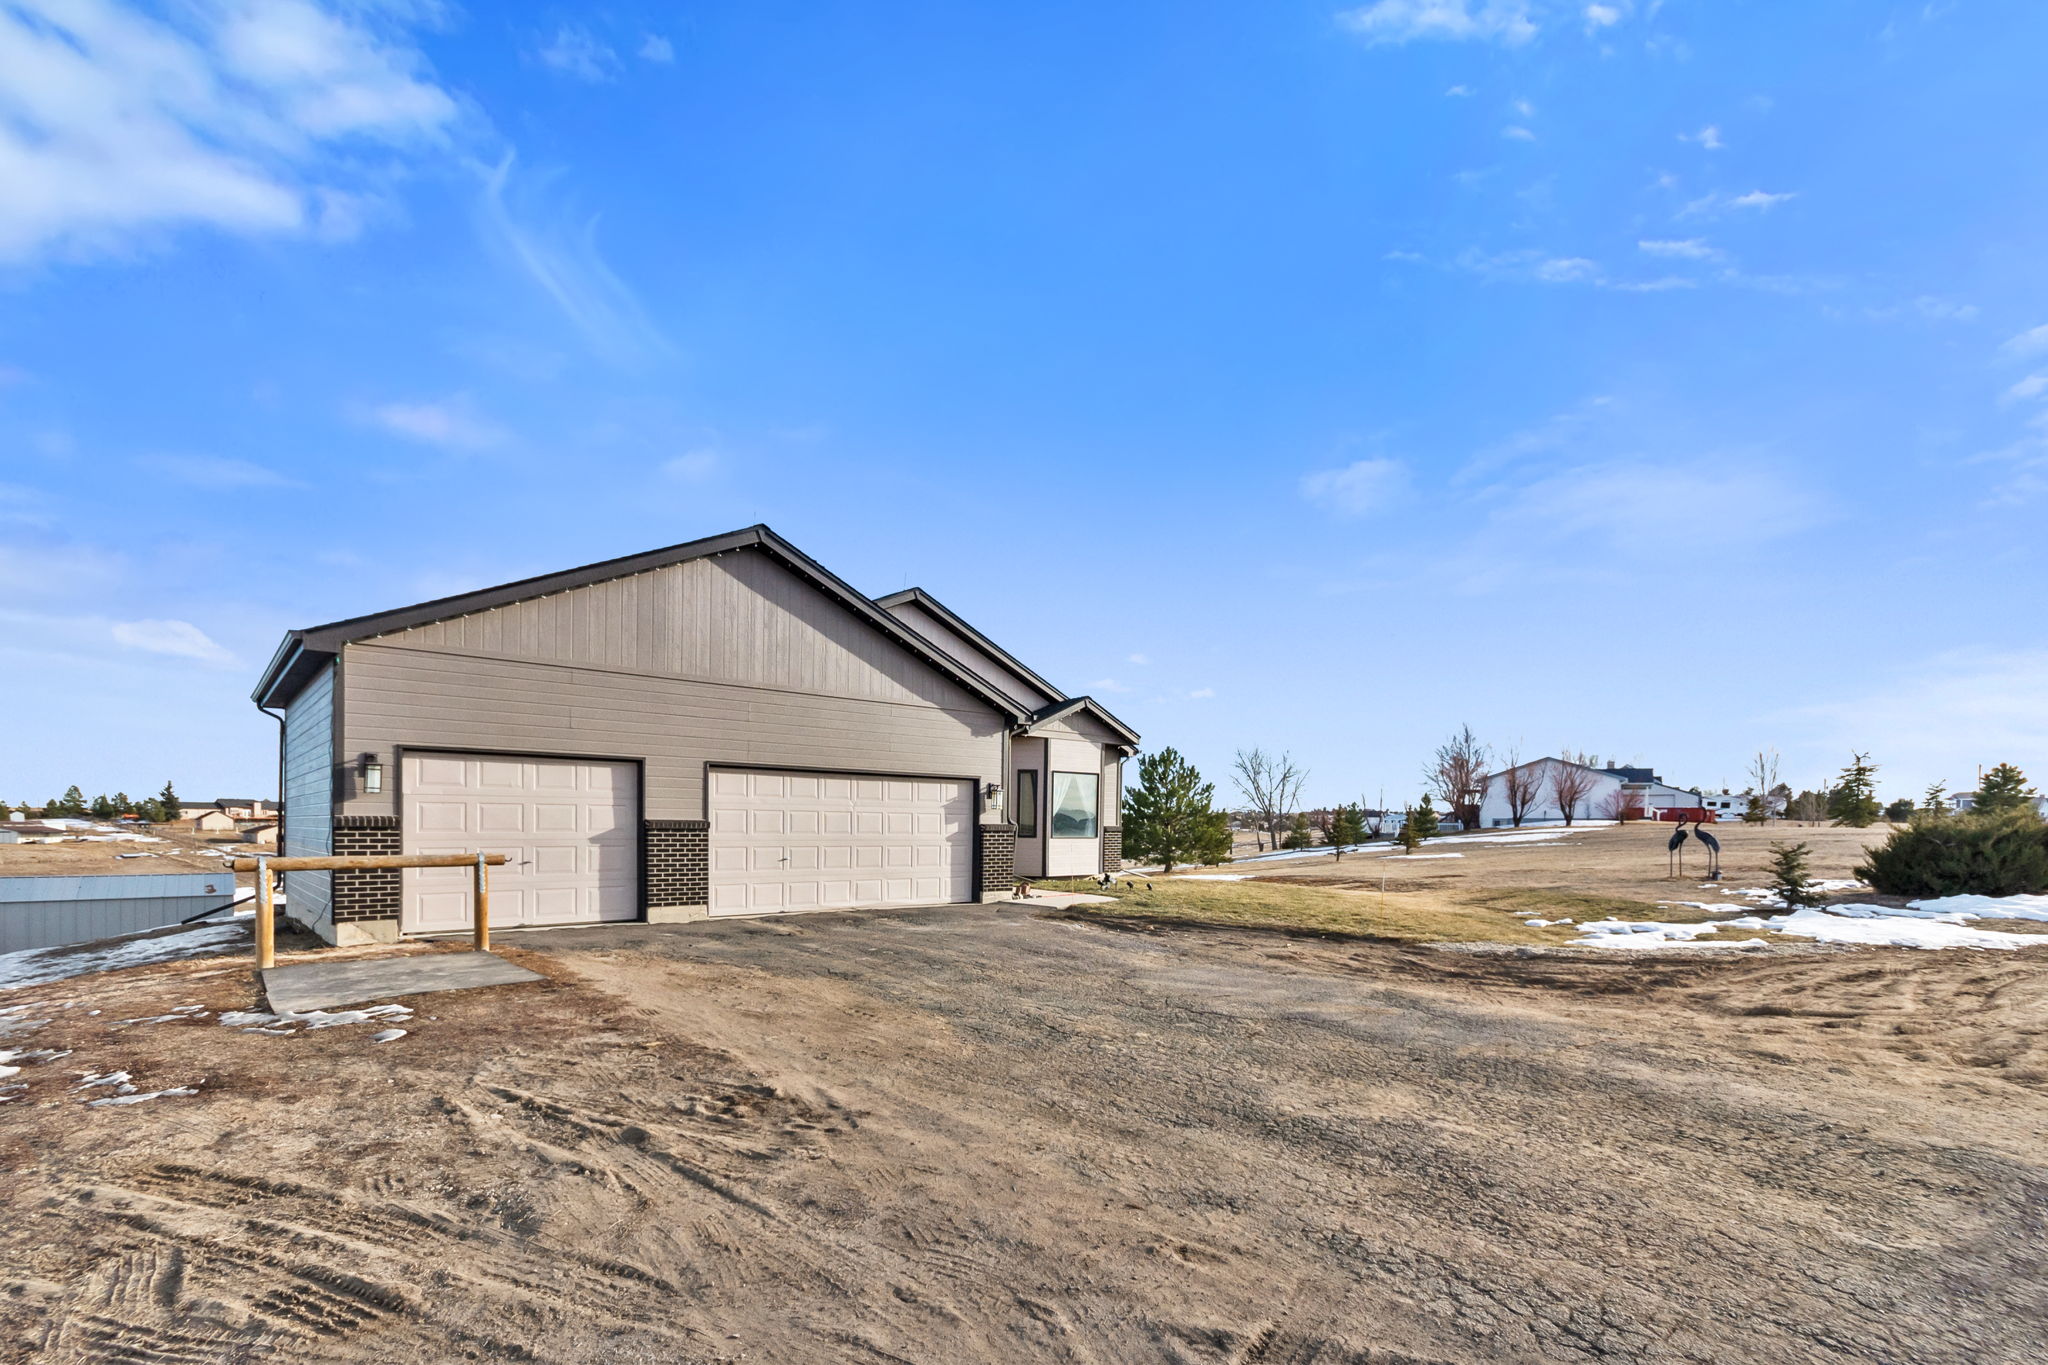  42386 Thunder Hill Rd, Parker, CO 80138, US Photo 2